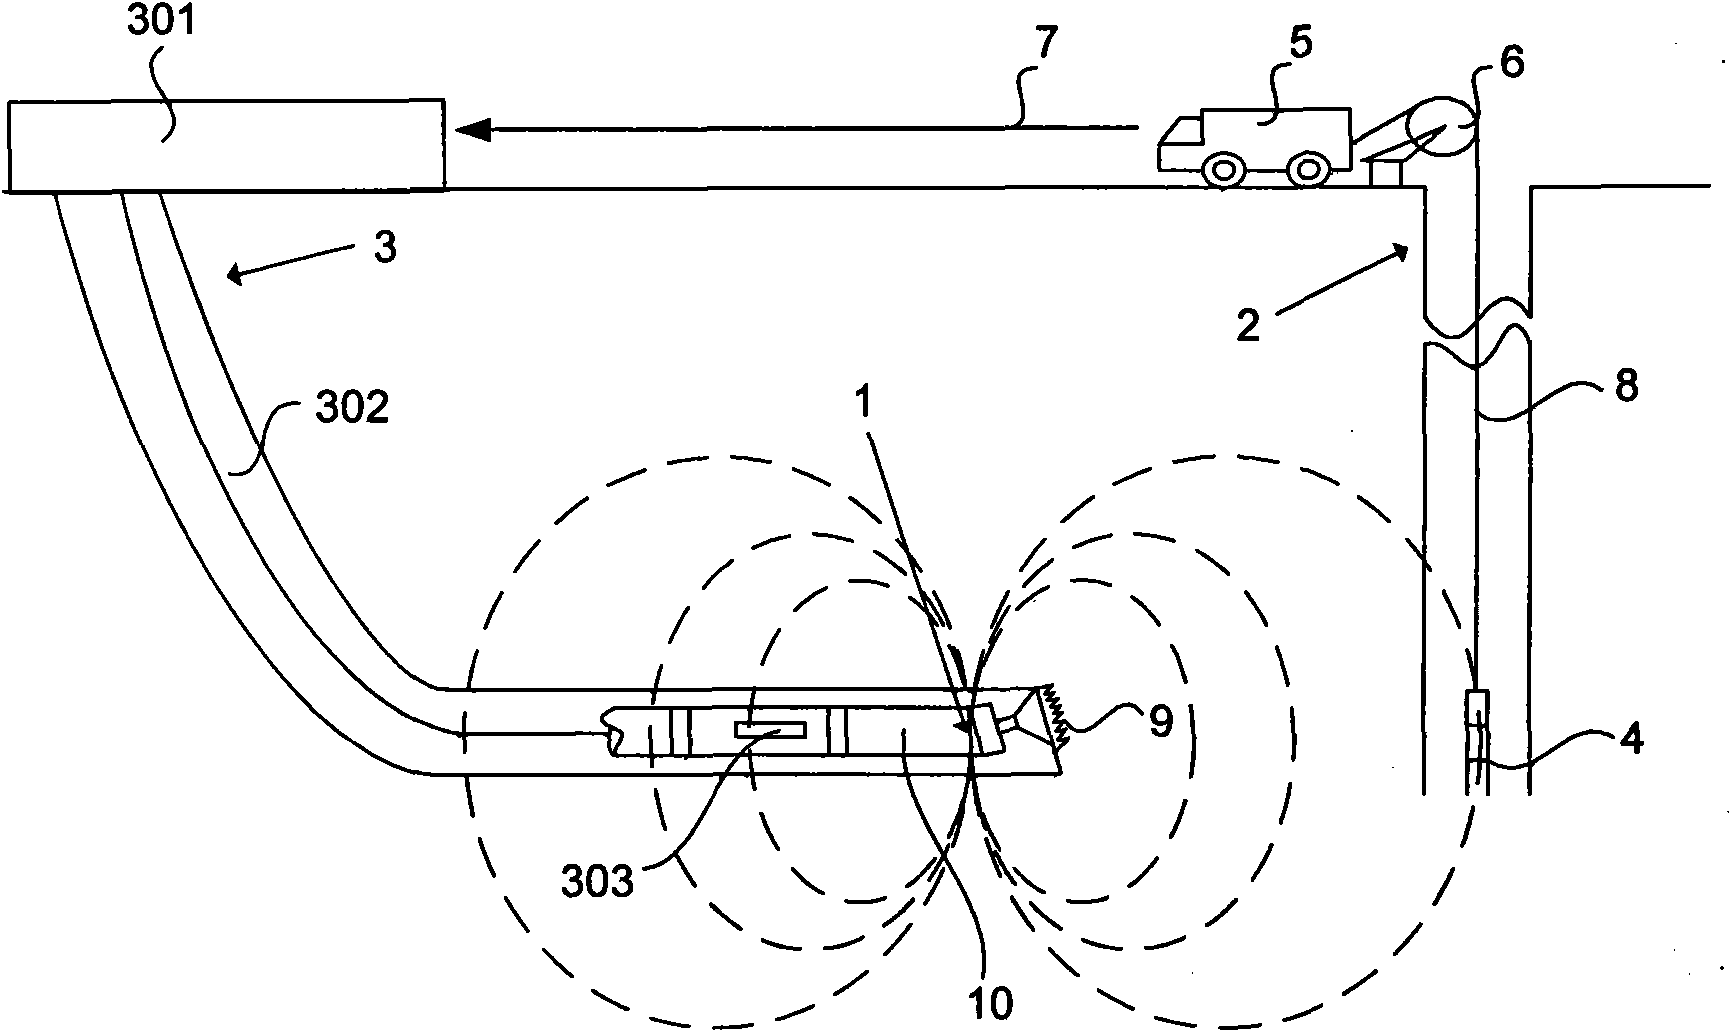 Active alternating magnetic field information-based method for guiding and positioning well drilling track